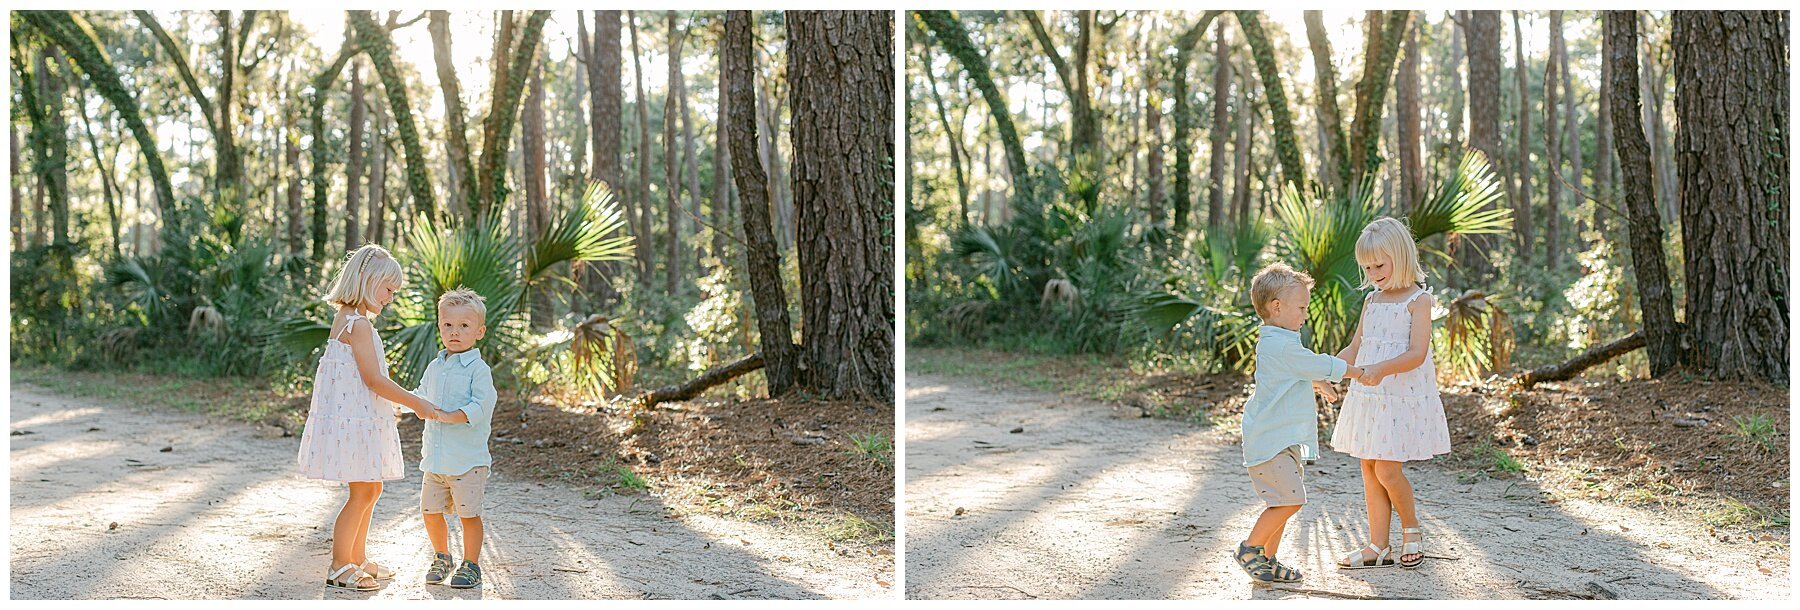 Katherine_Ives_Photography_Mcmillen_Montage_Palmetto_Bluff_9.jpg